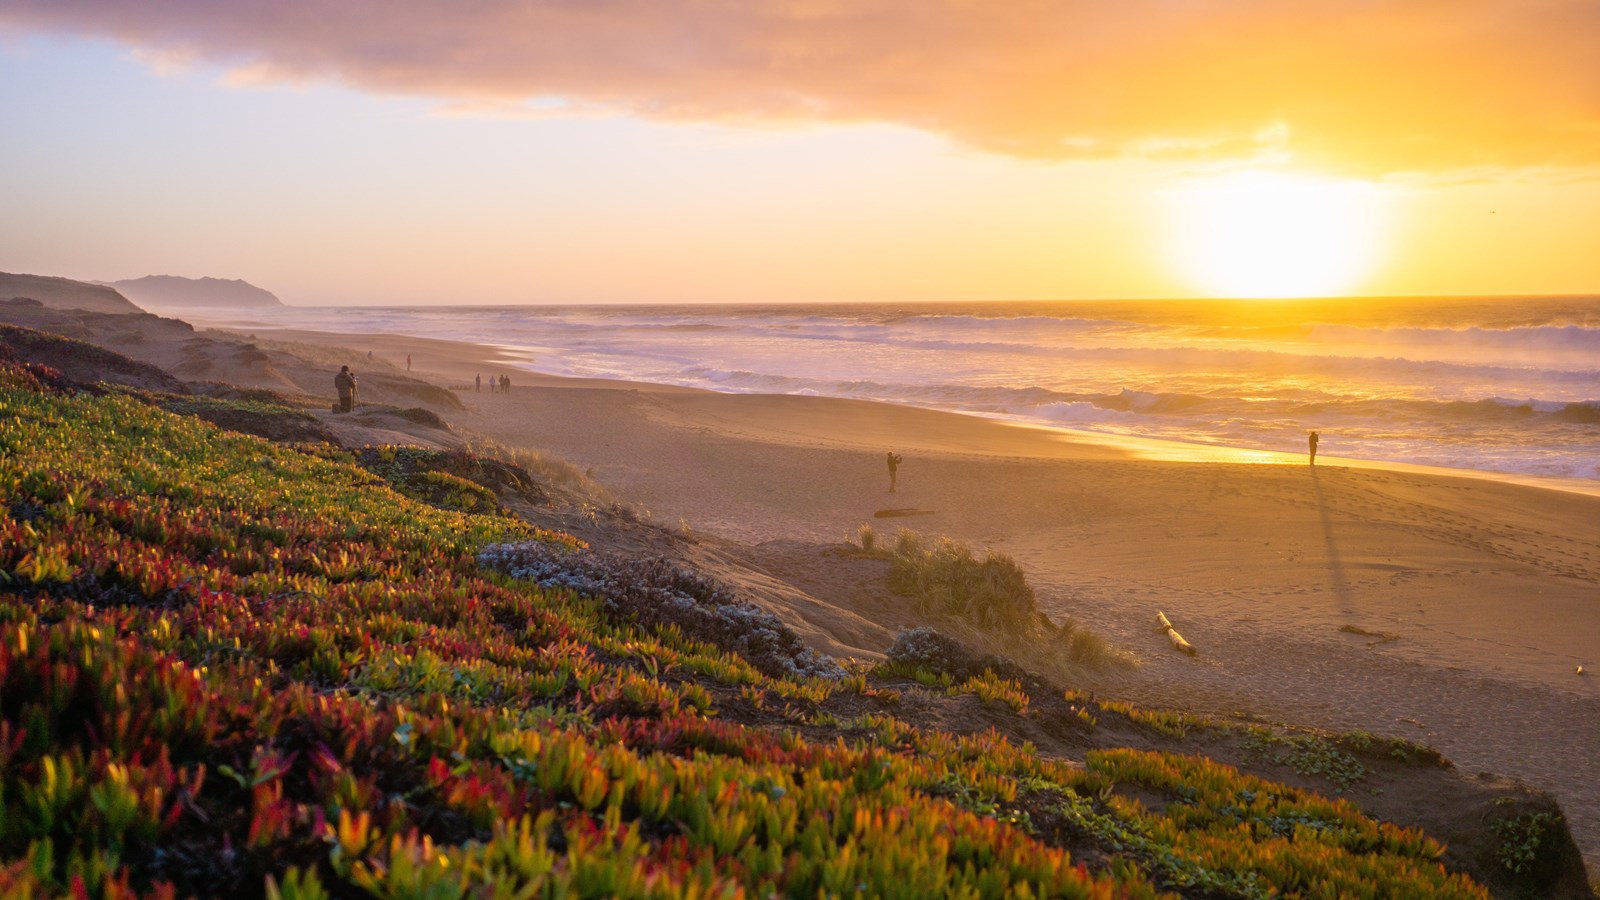 Visitors on a long sandy beach enjoying a sunset. Ice plant in the foreground.